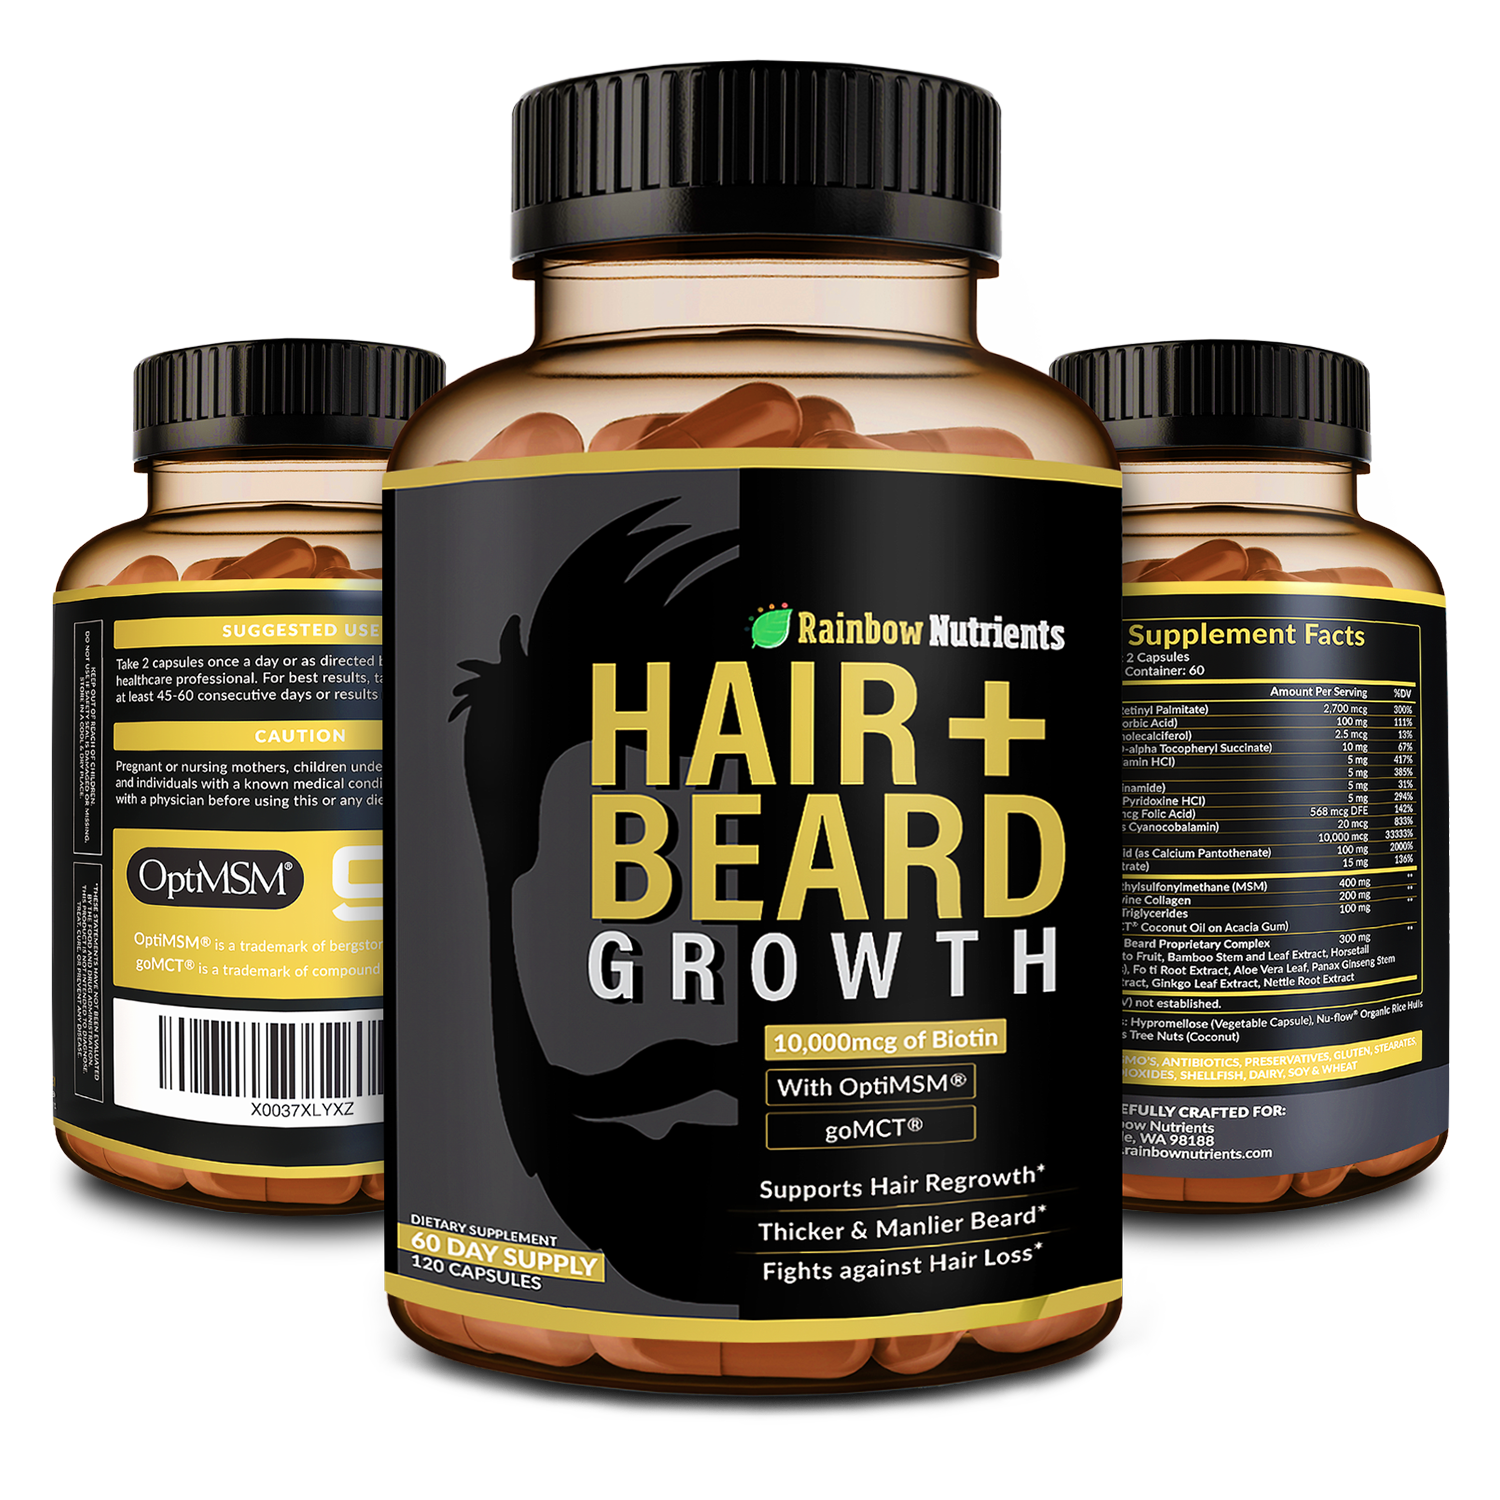 Hair Beard Growth bottle from all sides